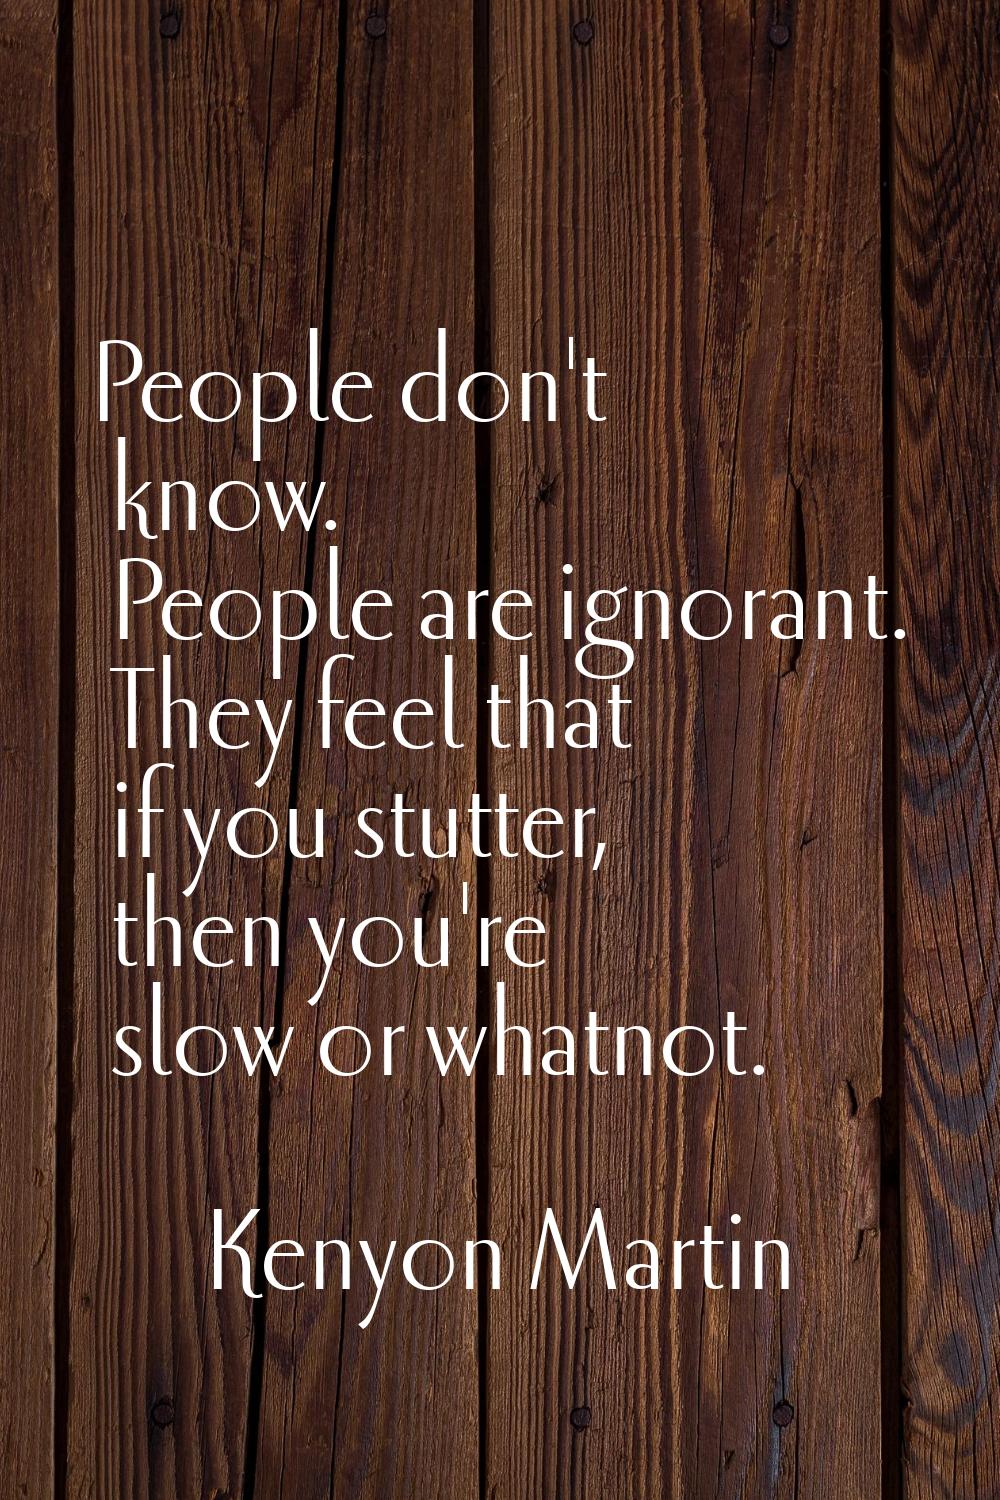 People don't know. People are ignorant. They feel that if you stutter, then you're slow or whatnot.